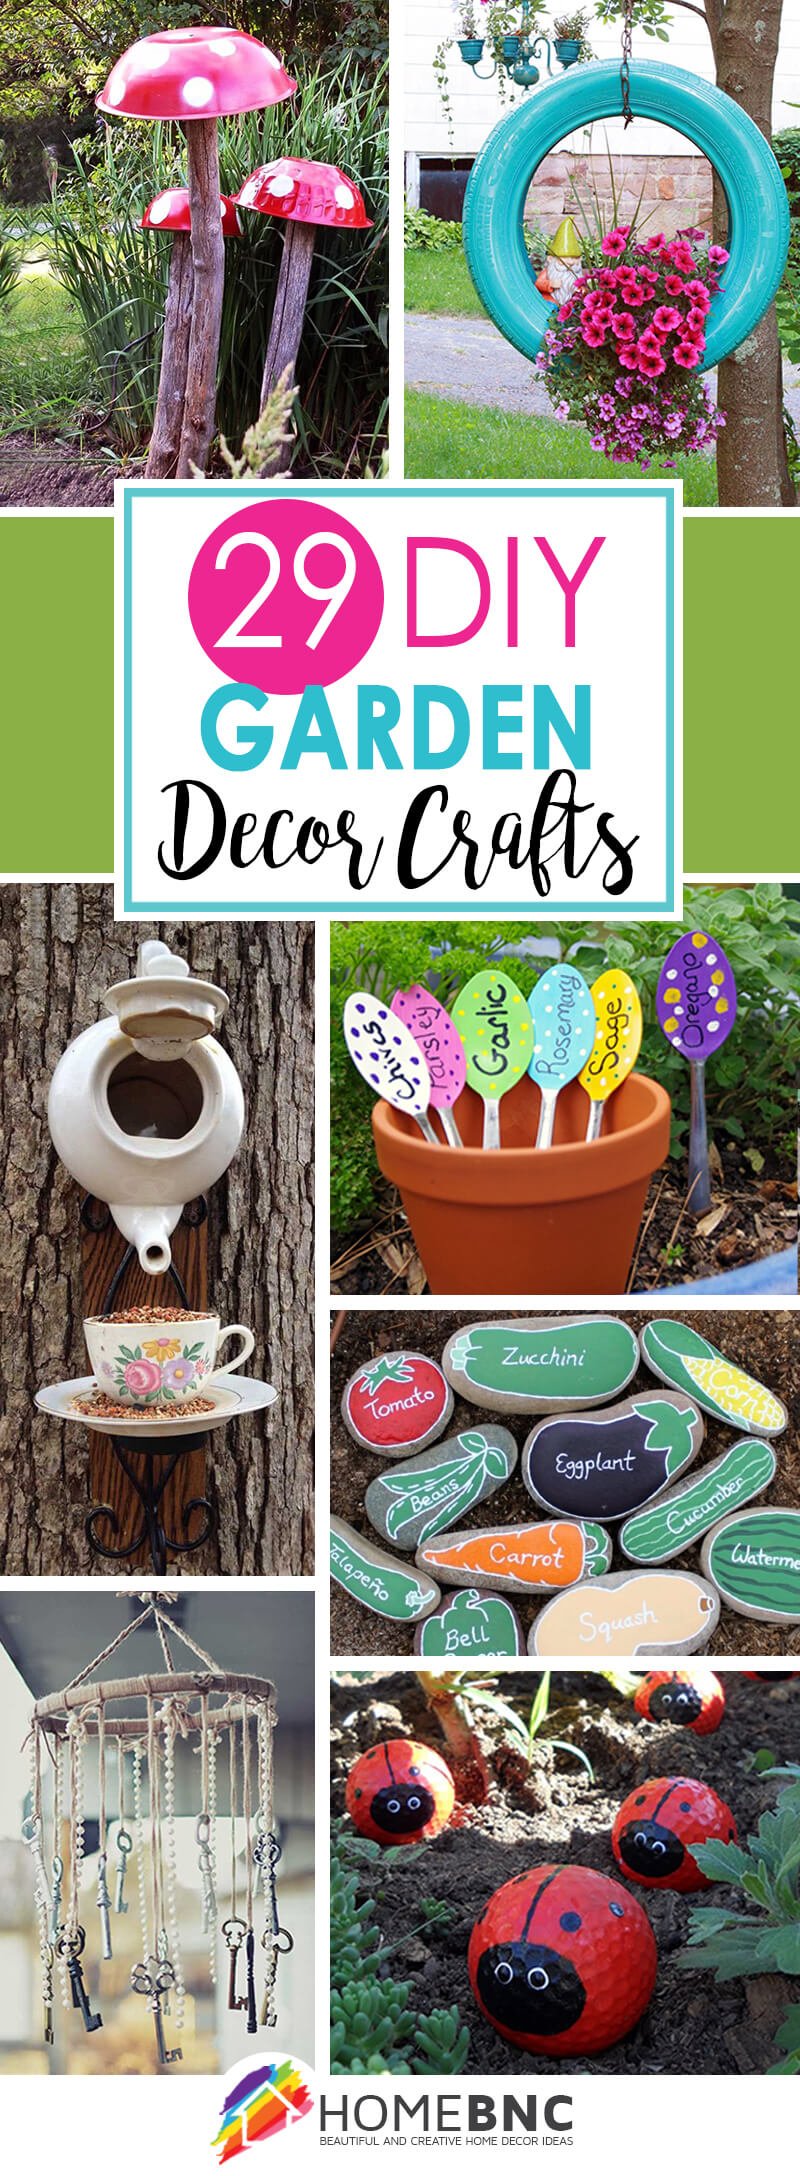 garden diy crafts outdoor make decorations cute craft decor projects kids gardening homebnc easy space homemade decorate backyard designs collect